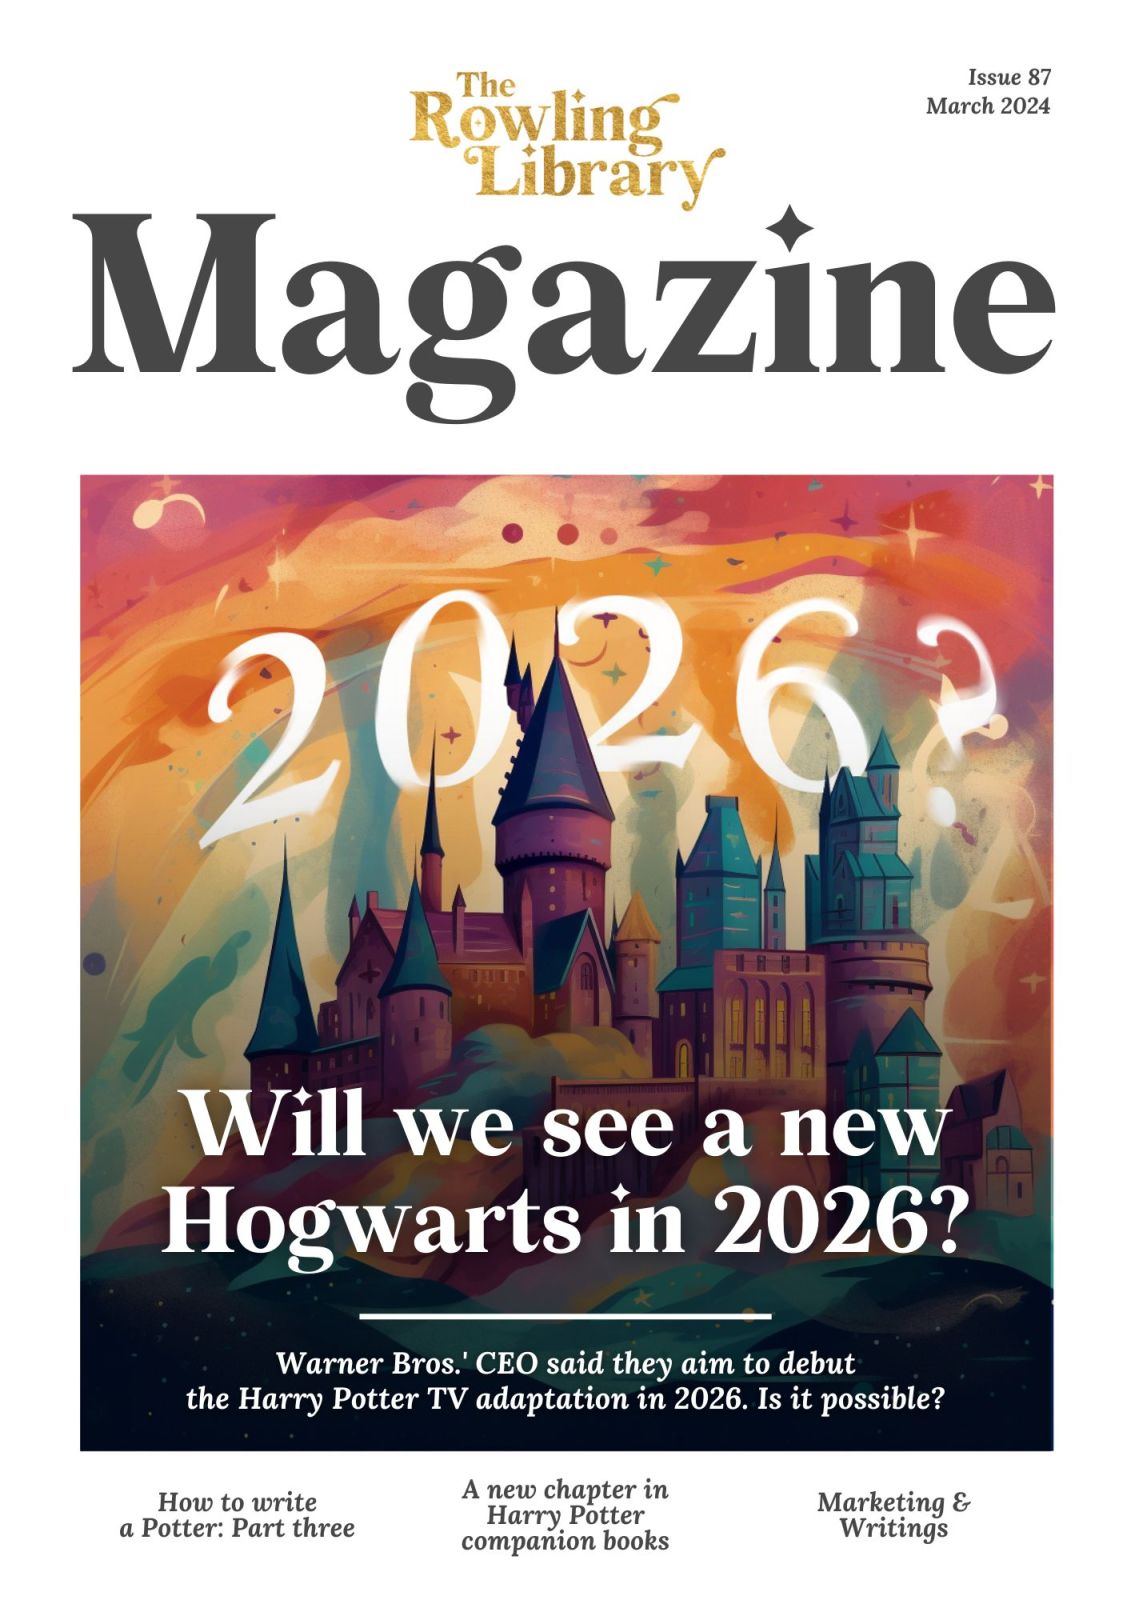 The Rowling Library Magazine #87 (March 2024): Will we see a new Hogwarts in 2026?